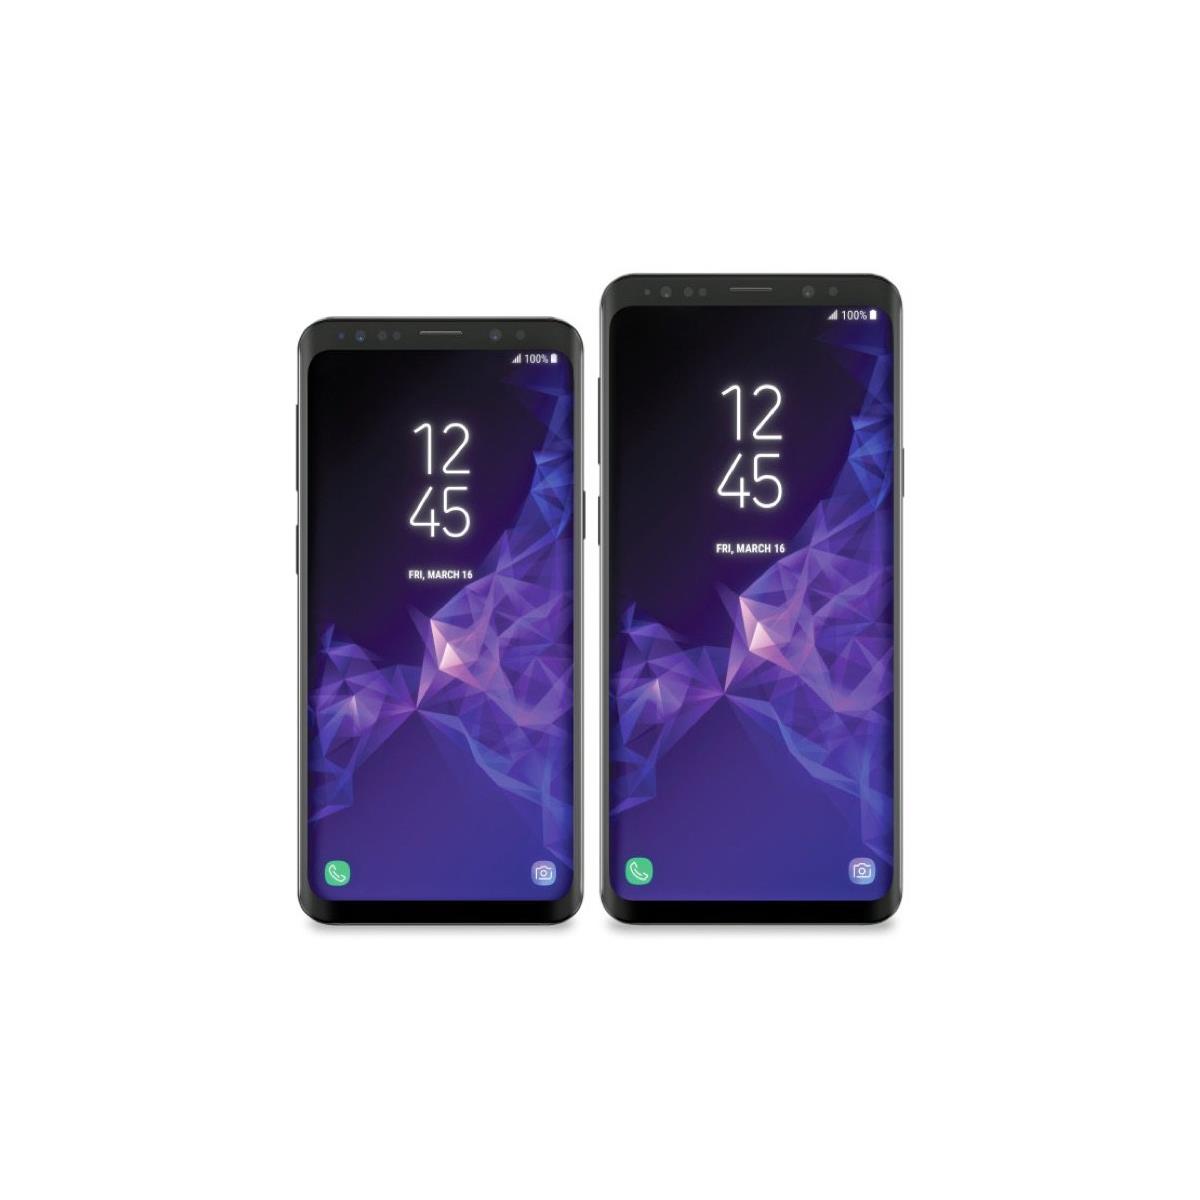 The Samsung Galaxy S9 and S9+ Review: Exynos and Snapdragon at 960fps